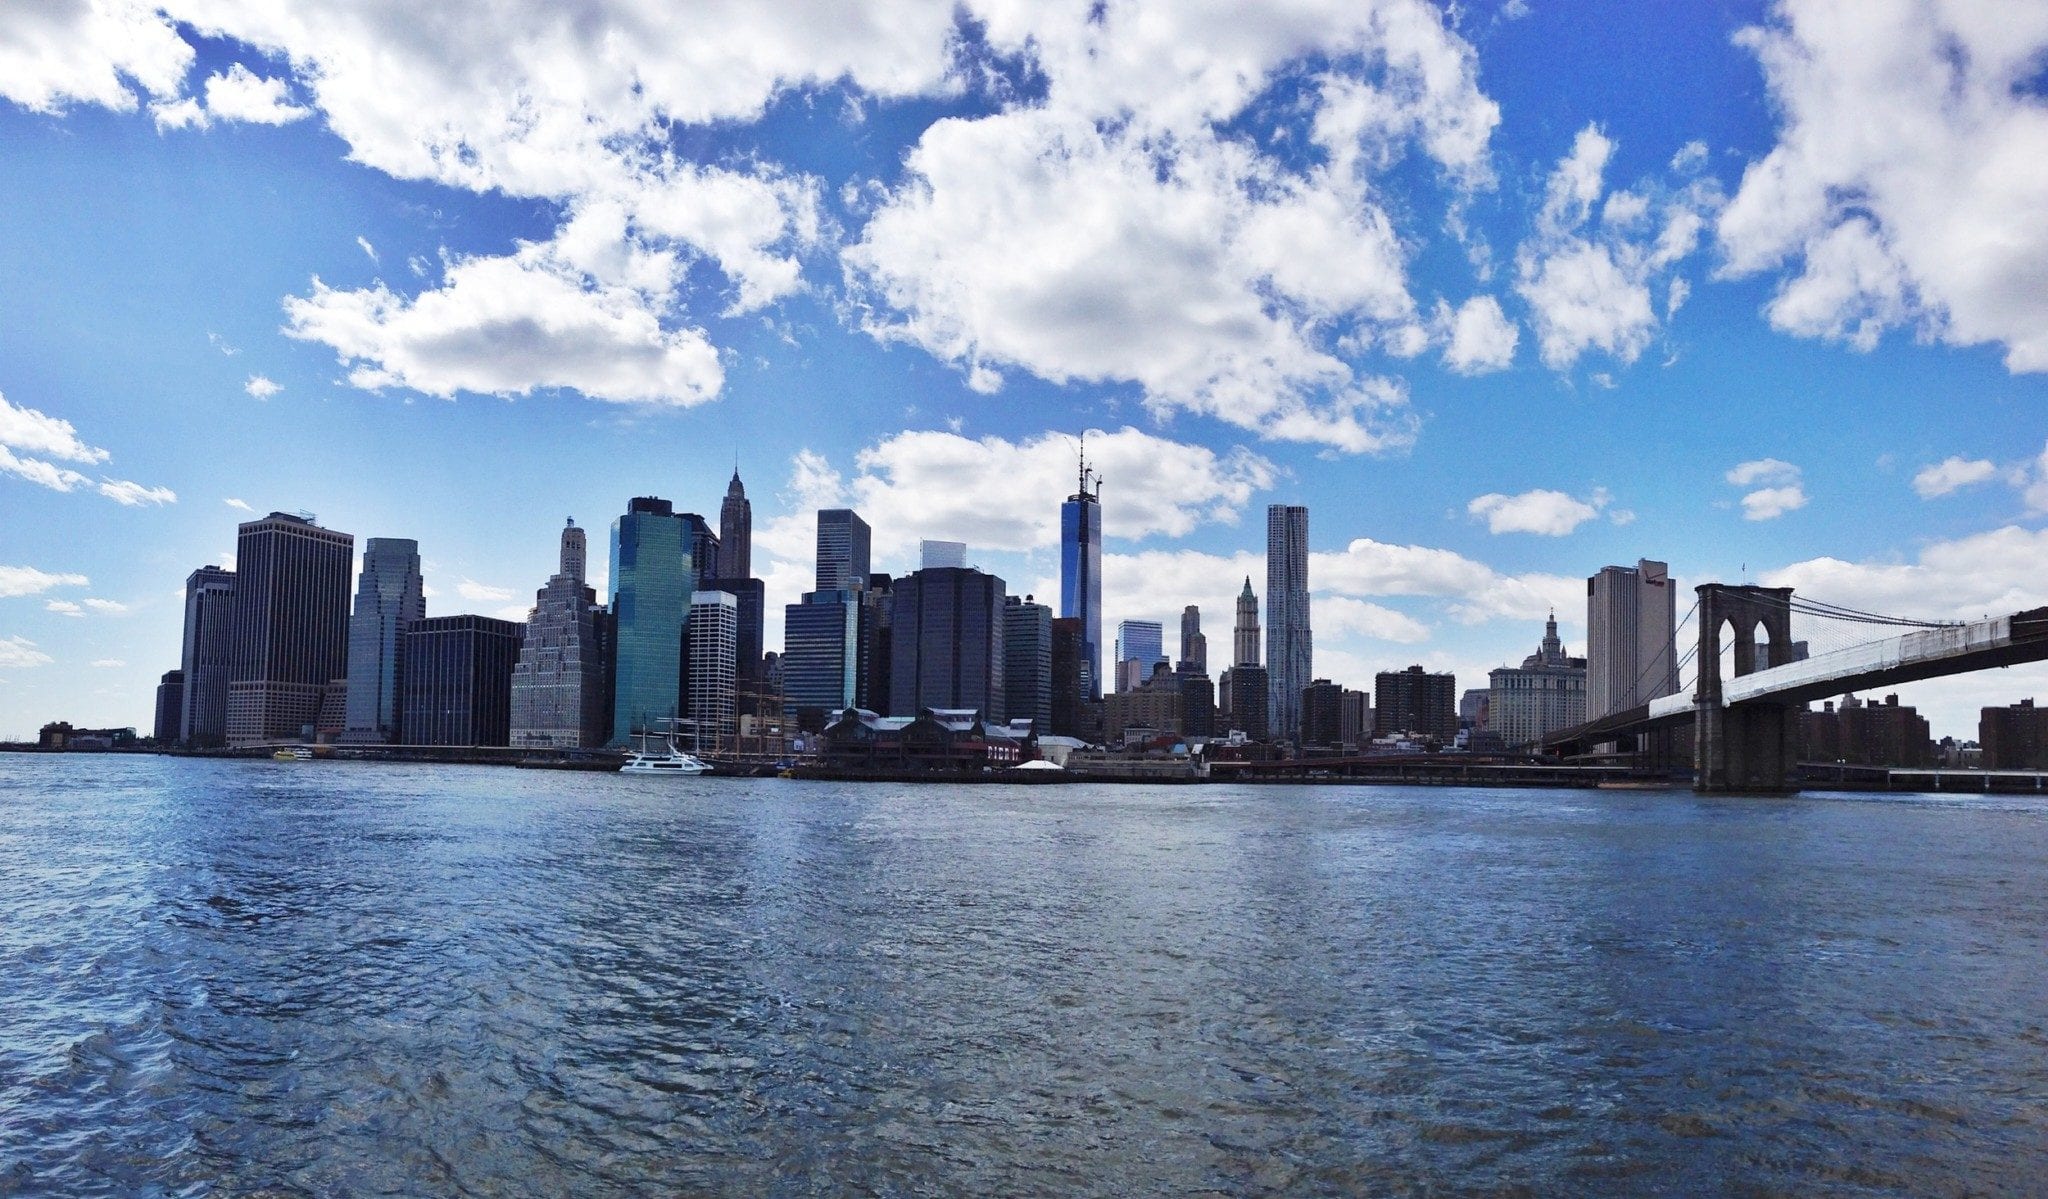 View of the New York City Skyline with puffy white clouds in a blue sky.